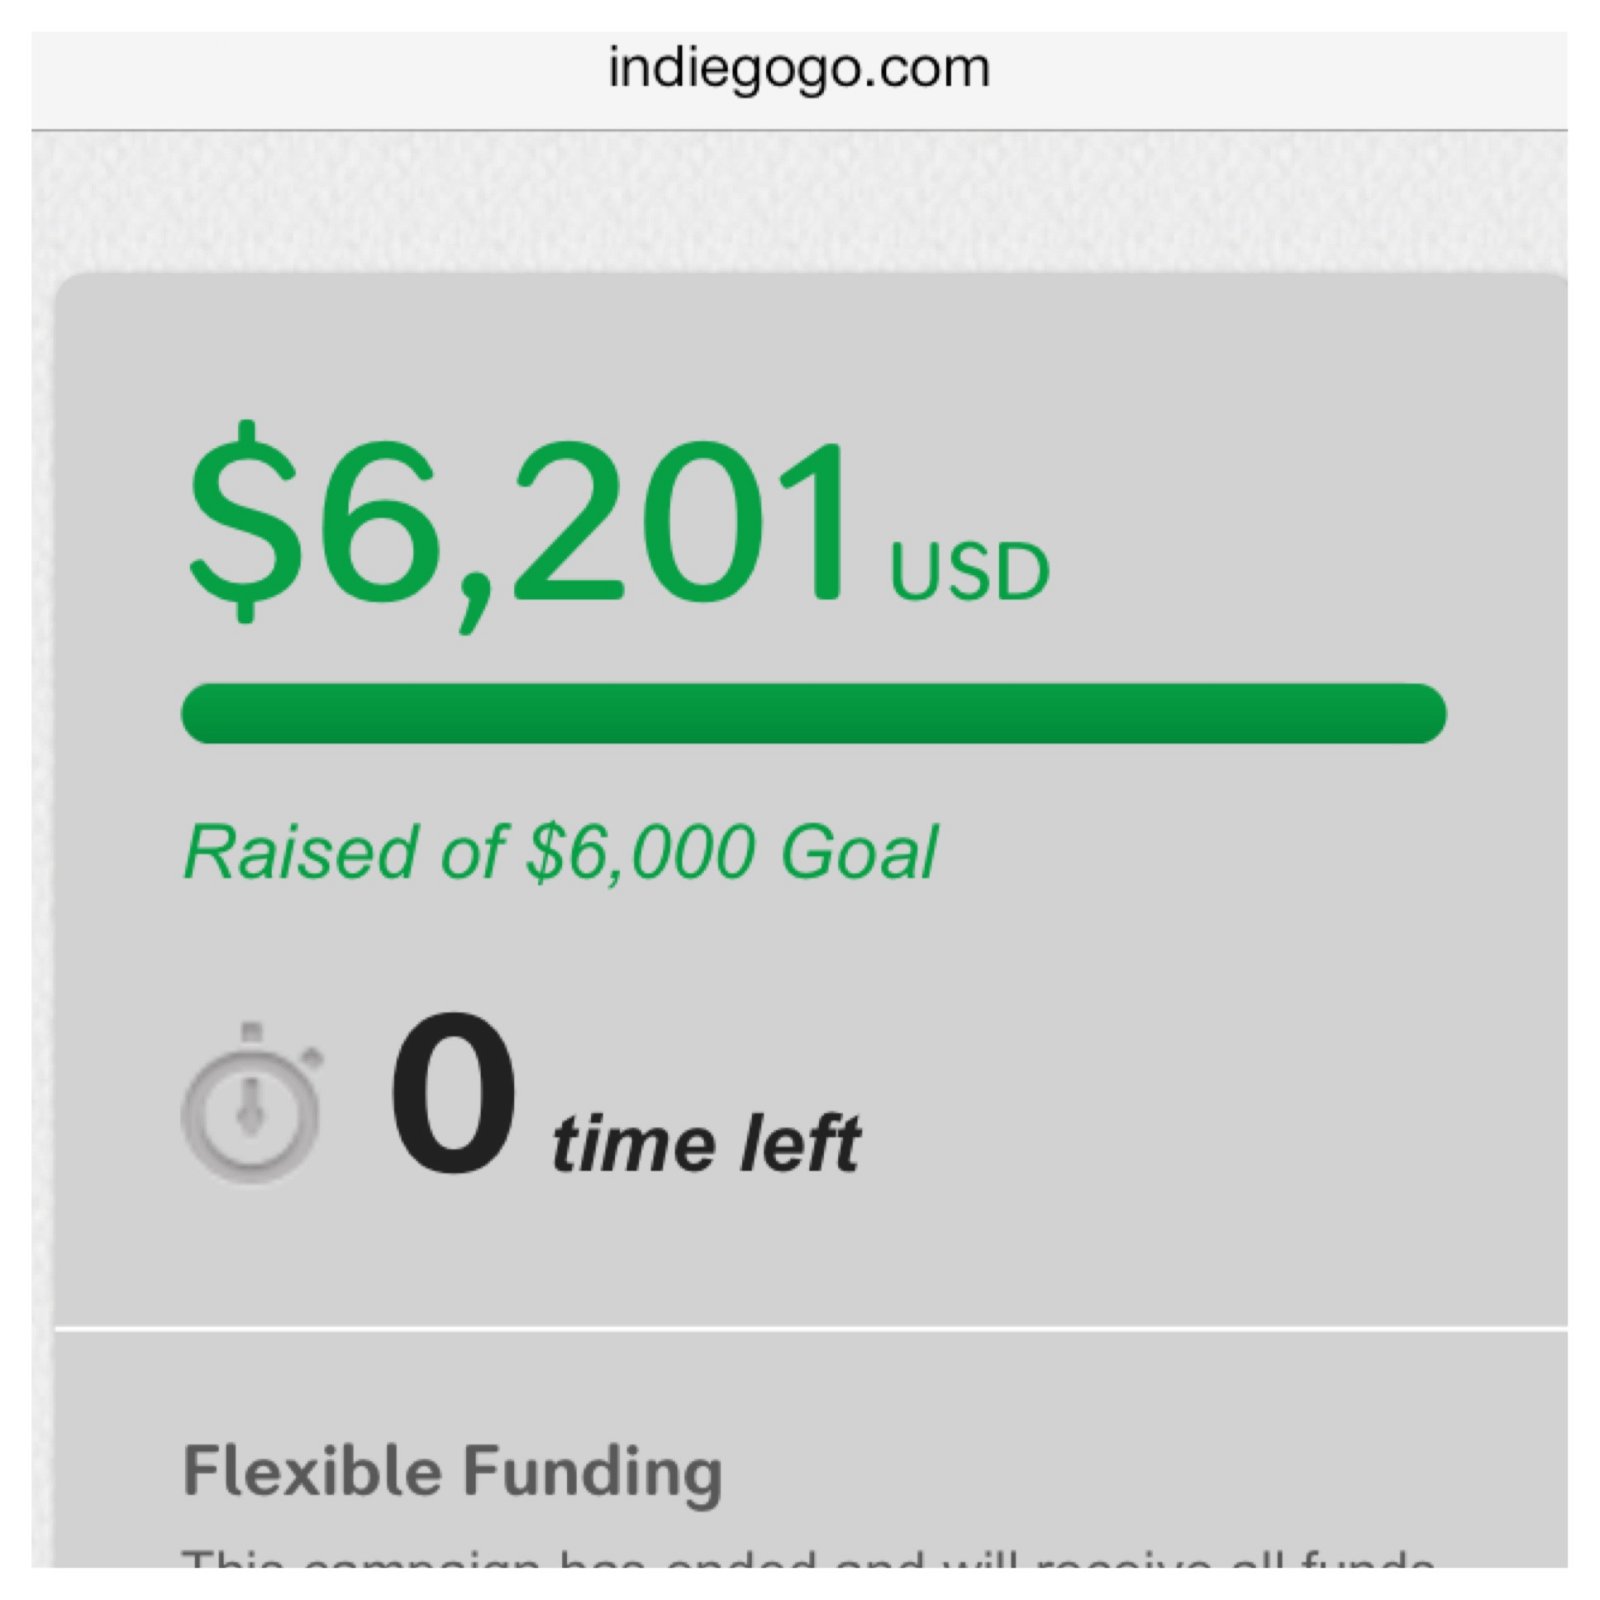 Screenshot of indiegogo campaign funds collected - $6,201 with a $6,000 goal!